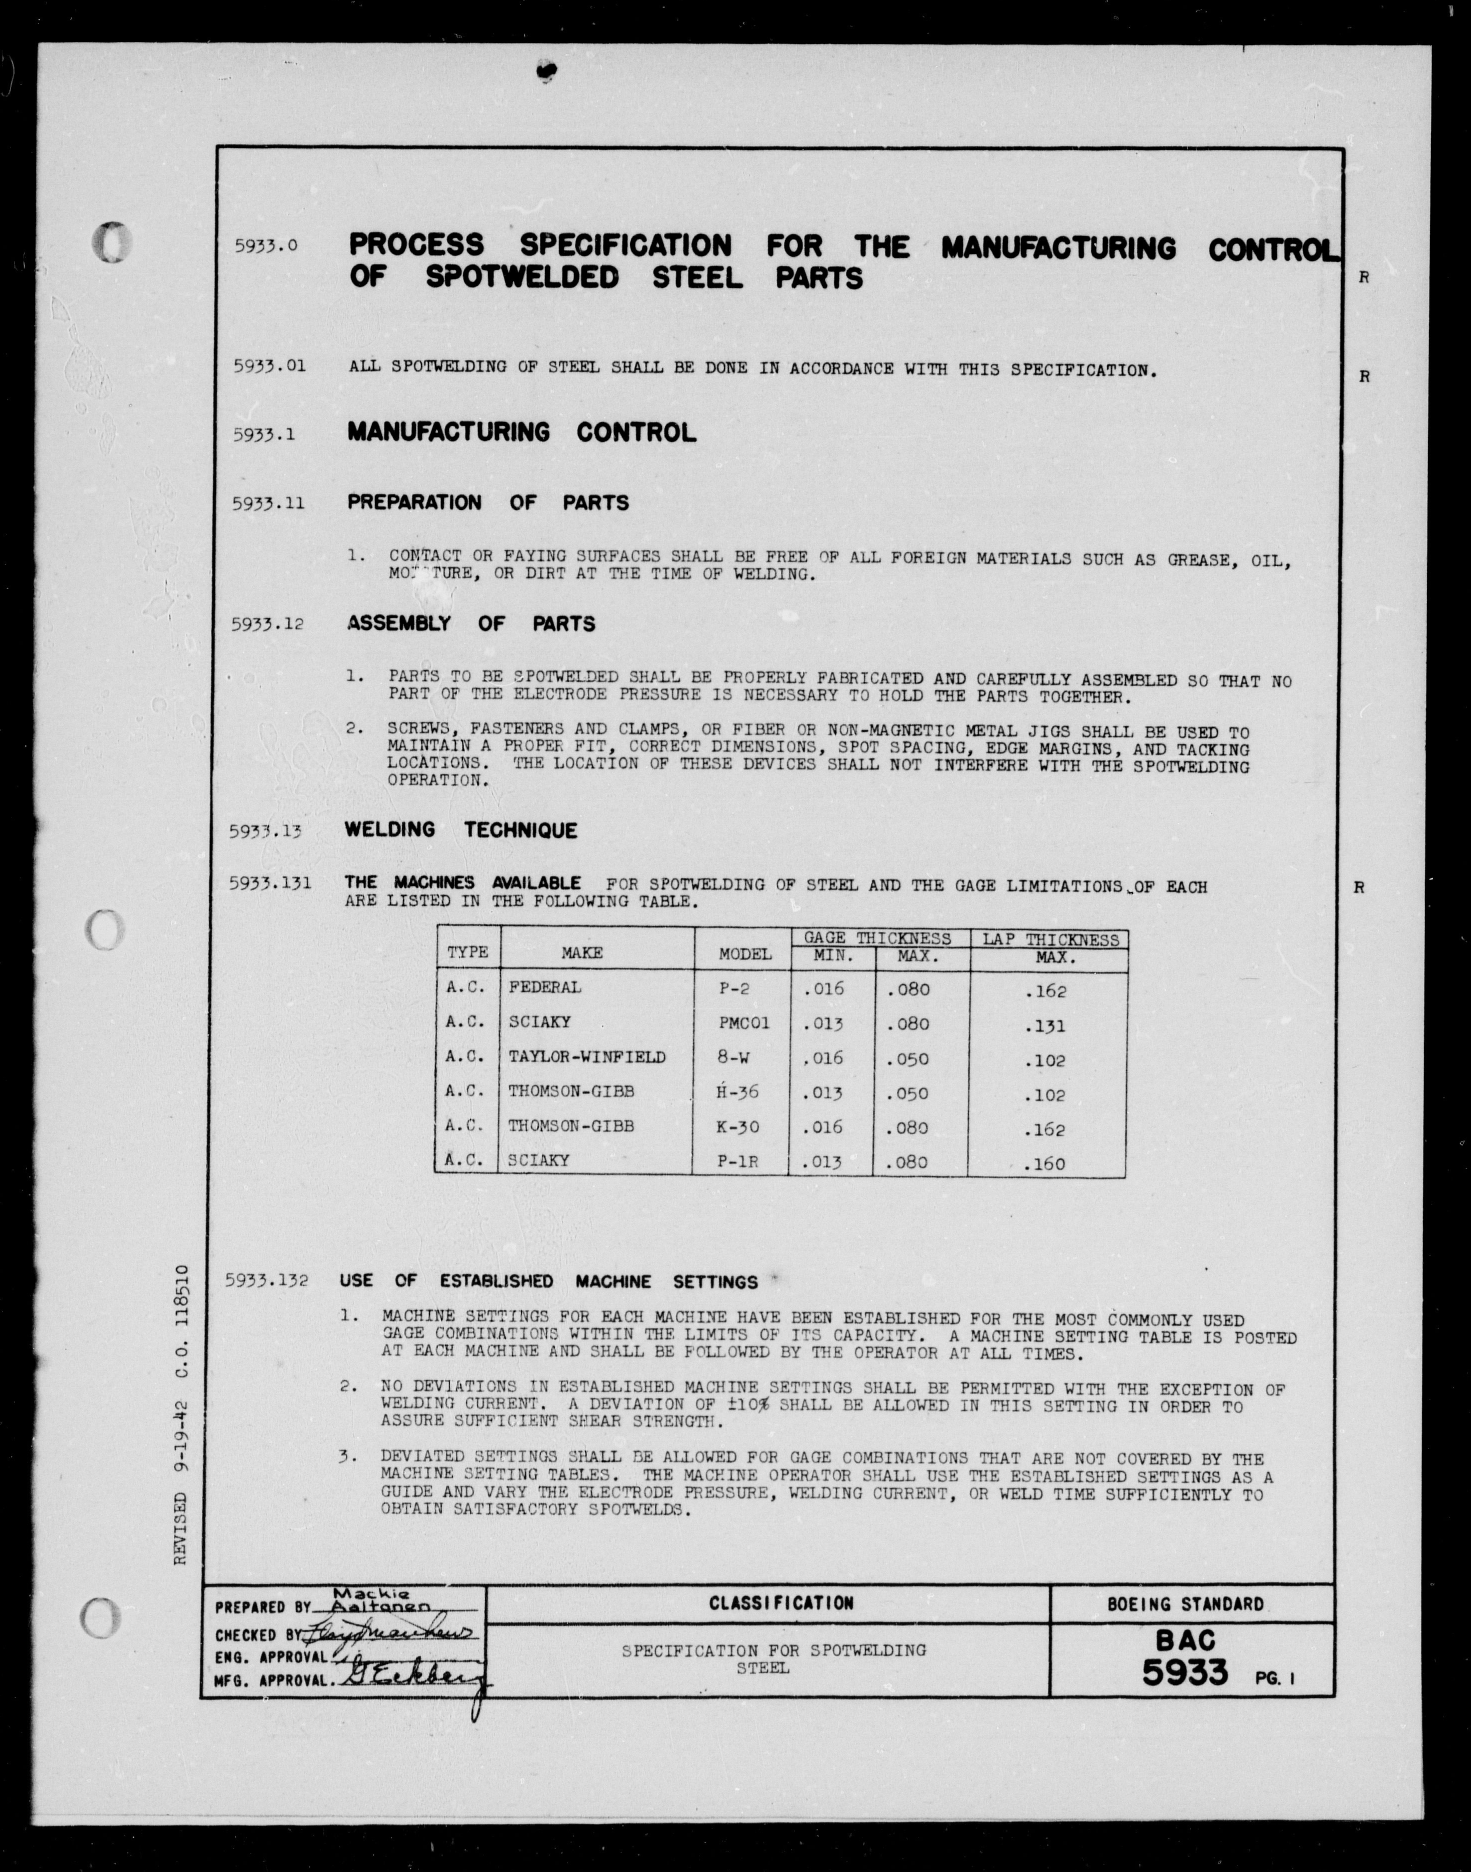 Sample page 1 from AirCorps Library document: Specification for Spotwelding Steel